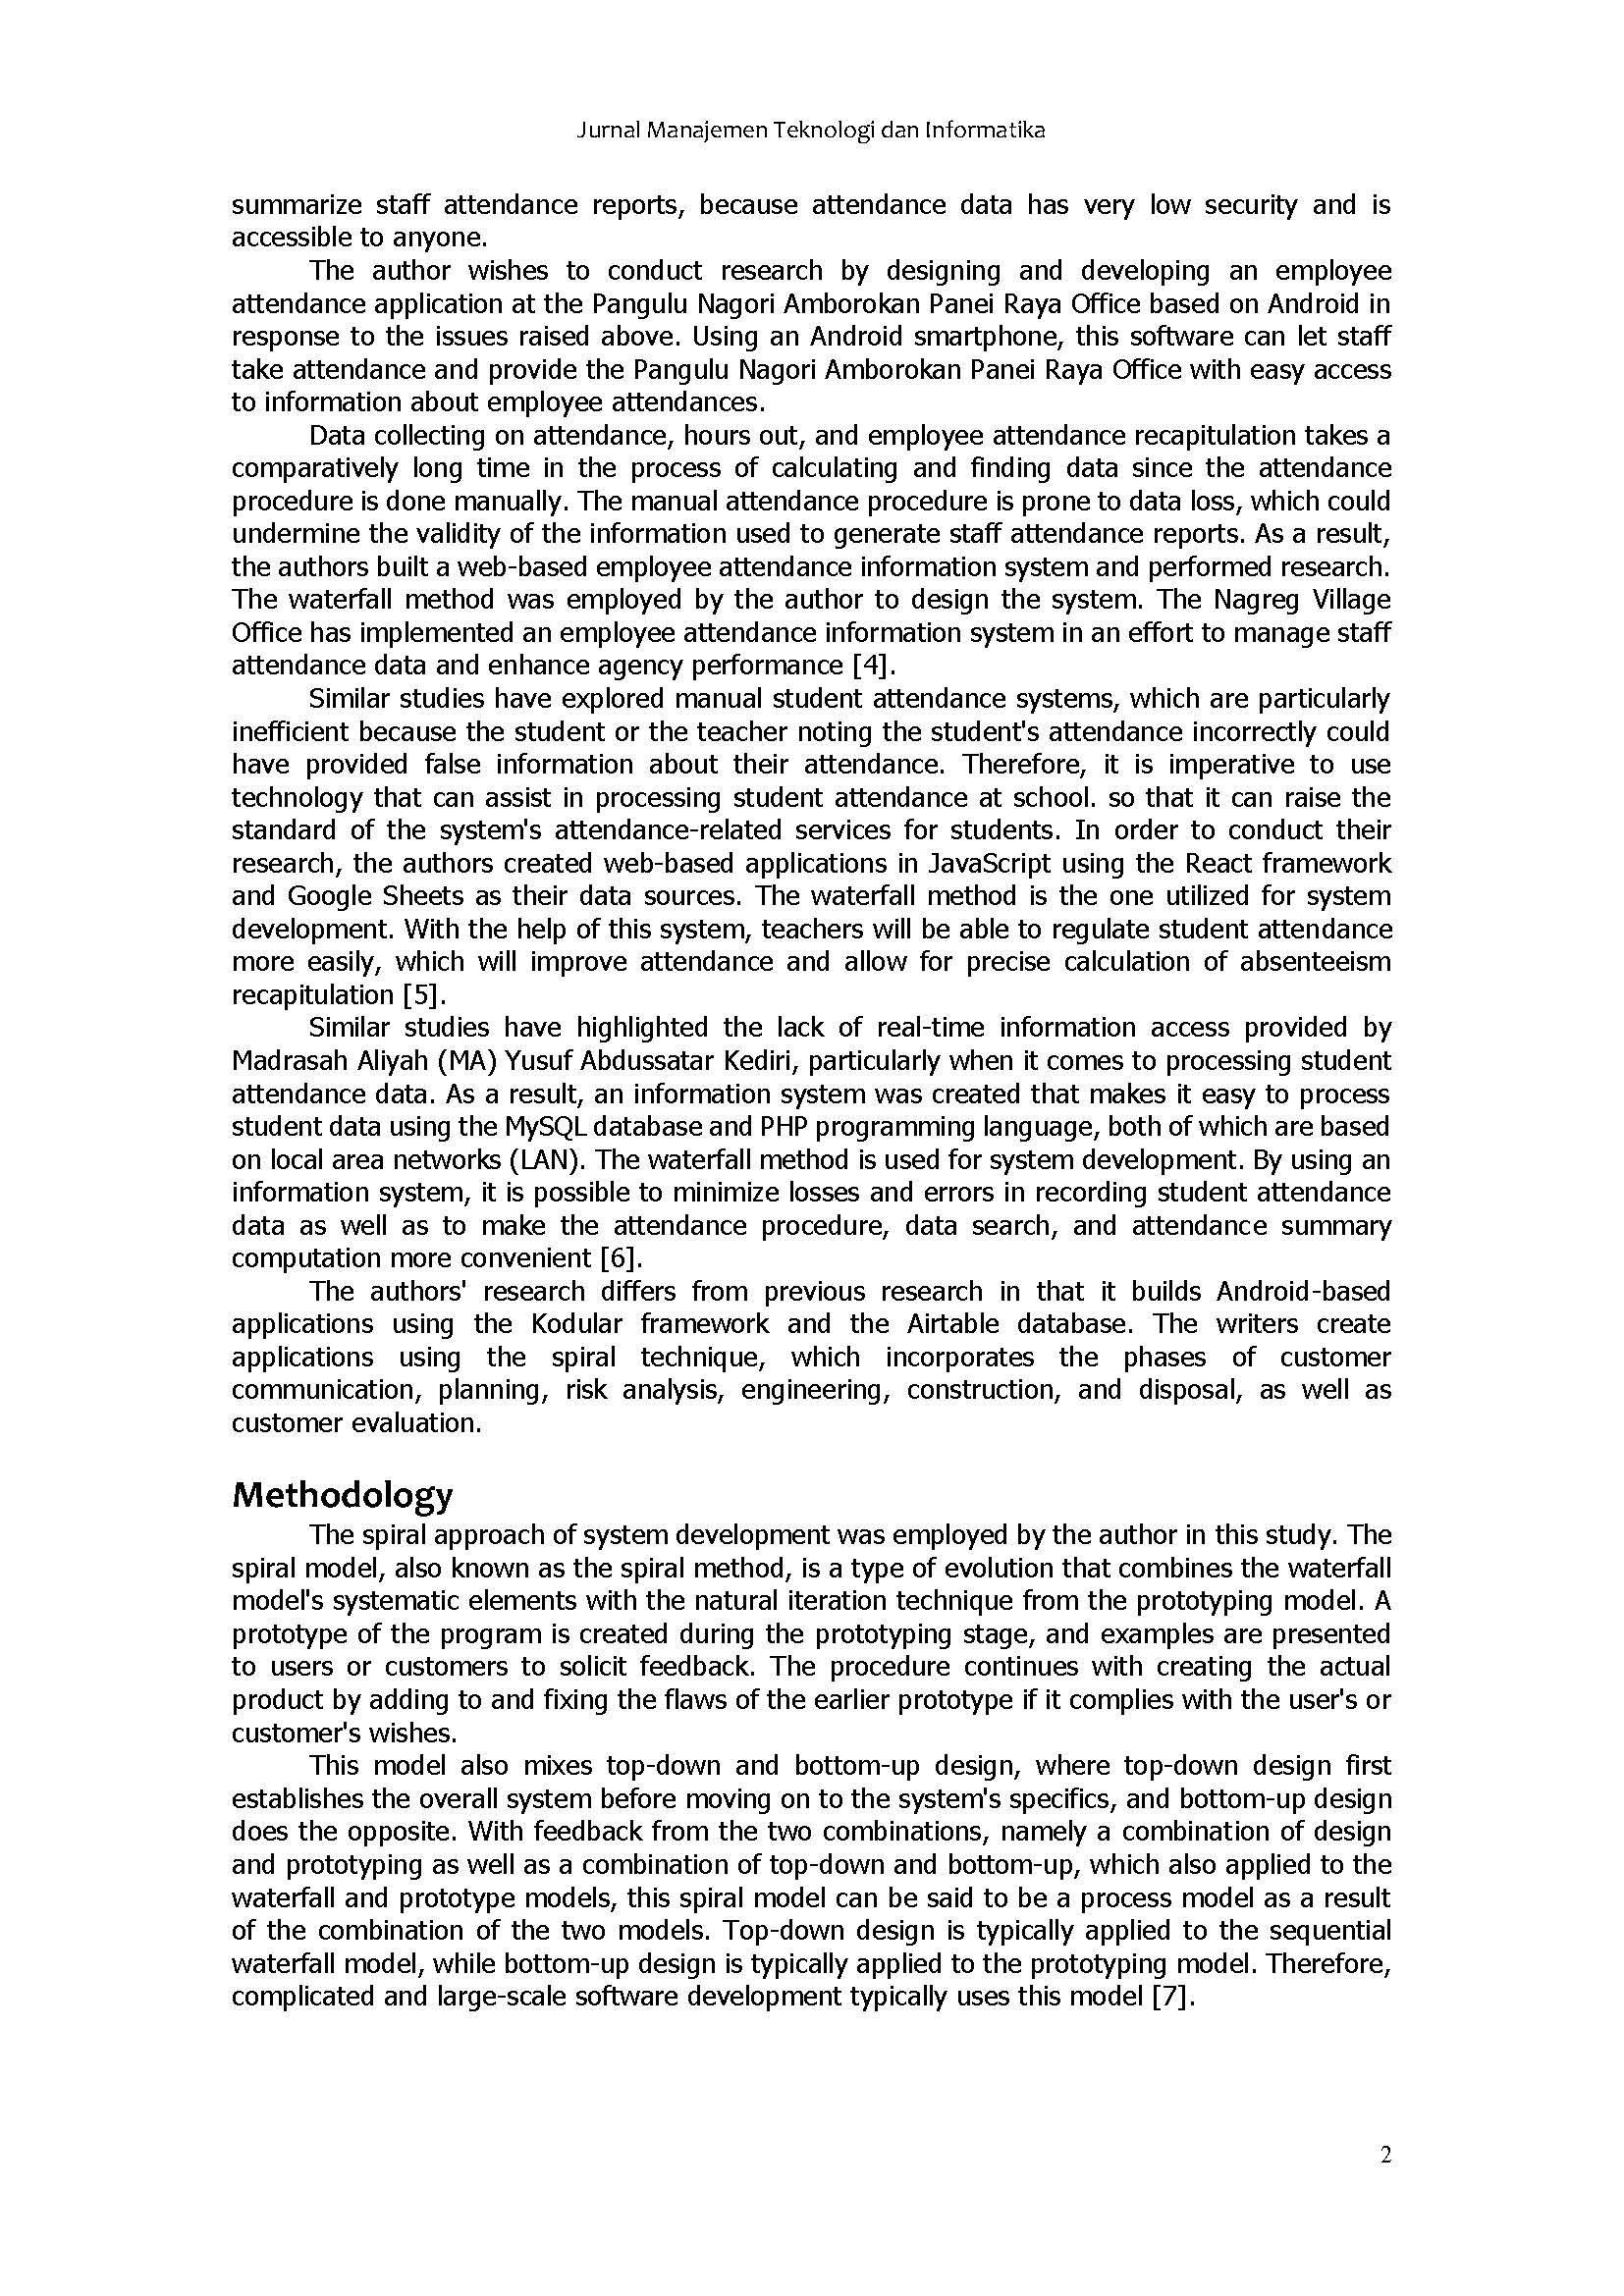 SAMPLE OF SUBMITTED PAPER